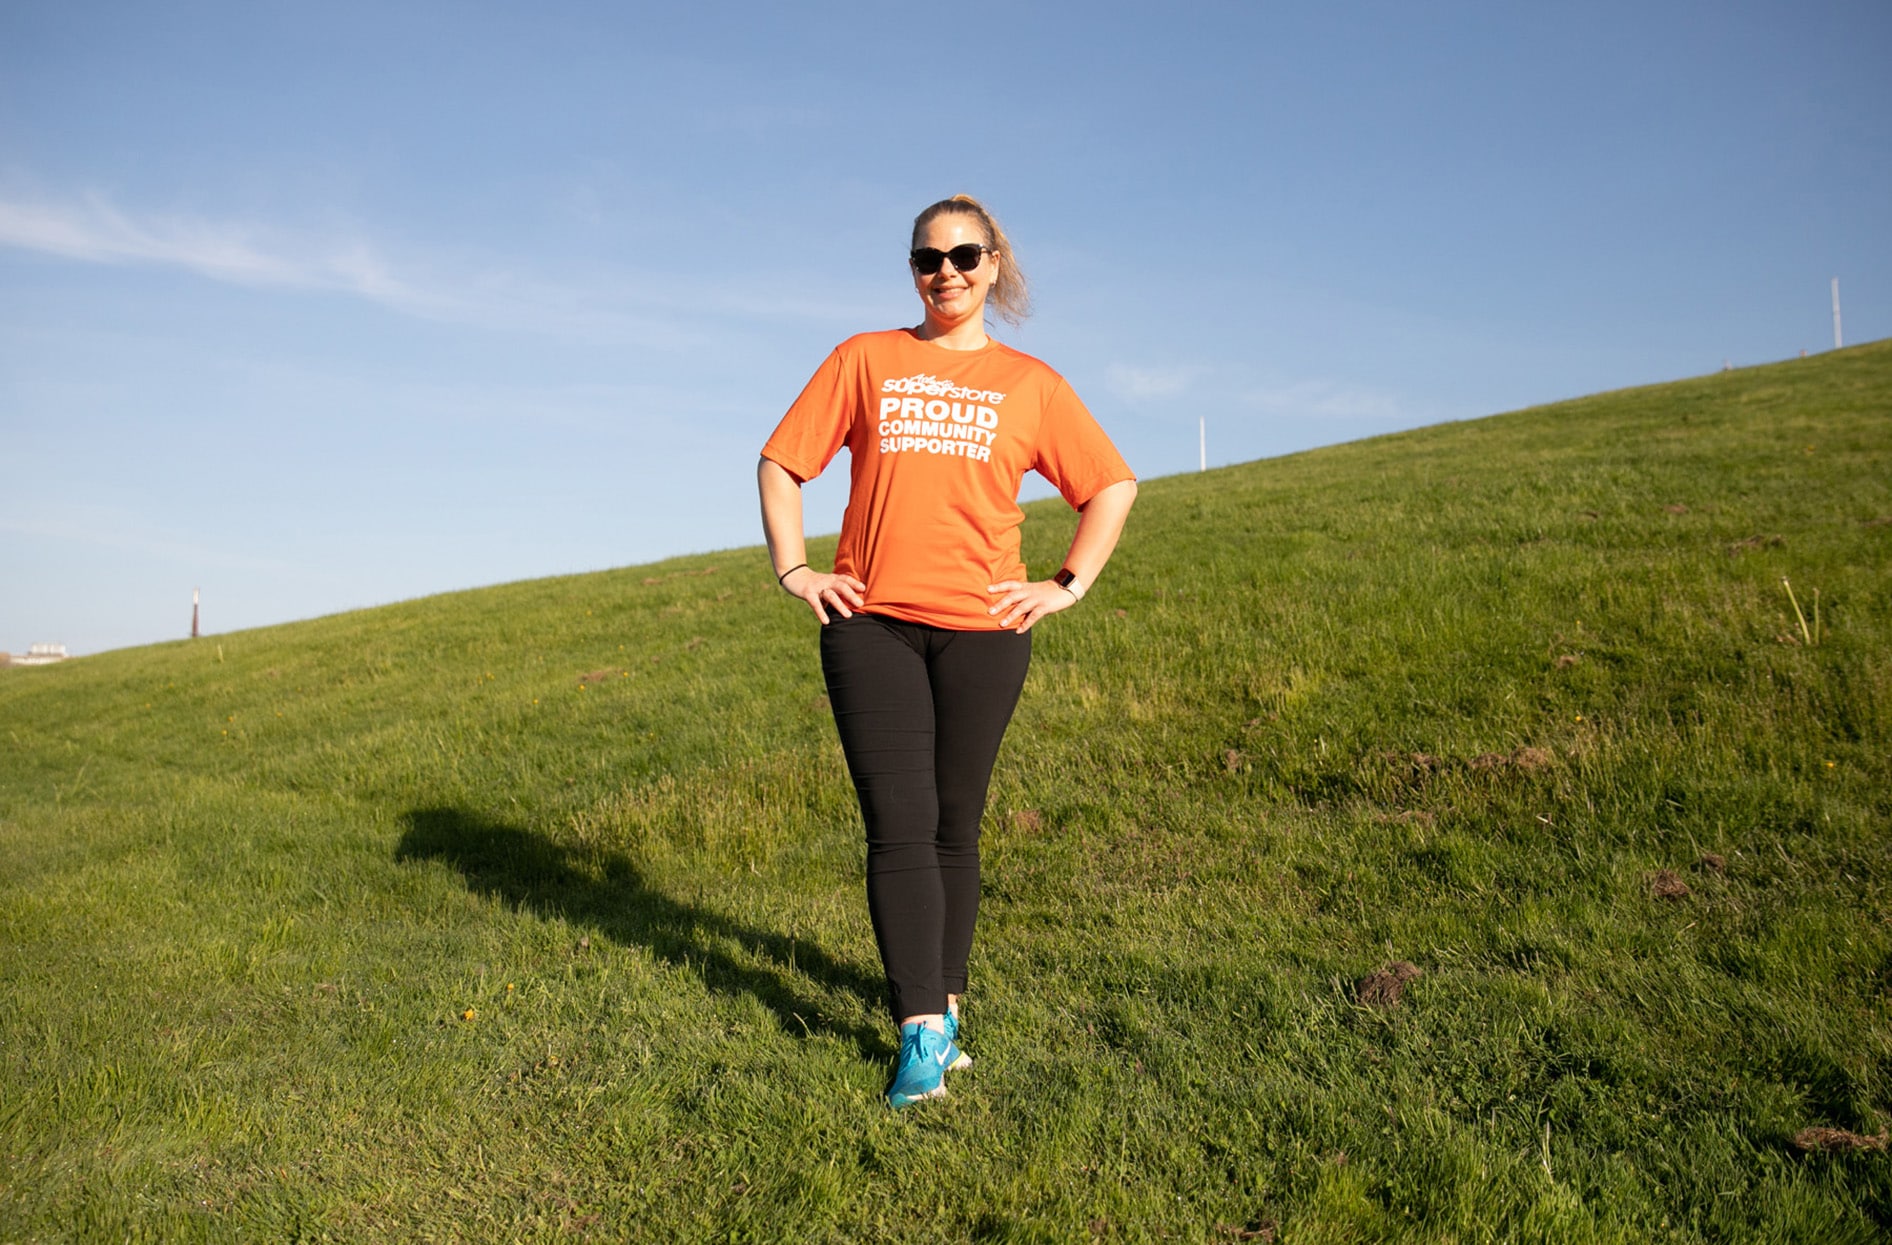 Belinda stands outside on the field smiling while wearing an orange Atlantic Superstore shirt that says, “Proud Community Supporter.”